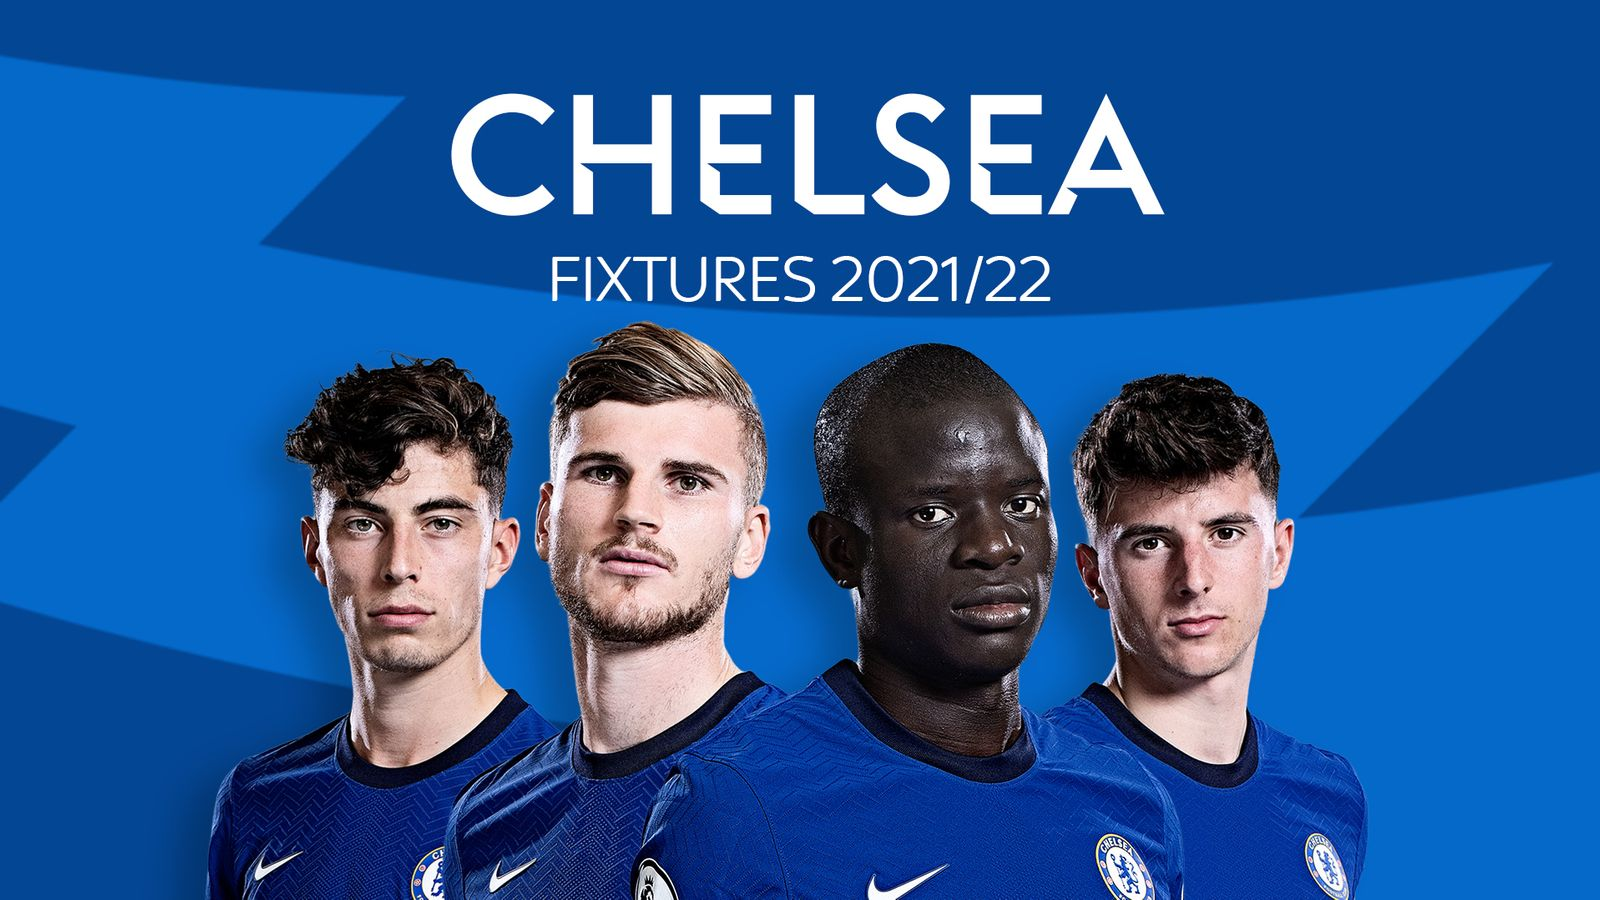 Chelsea Premier League 2021-22: Fixtures and Match Schedules in Full